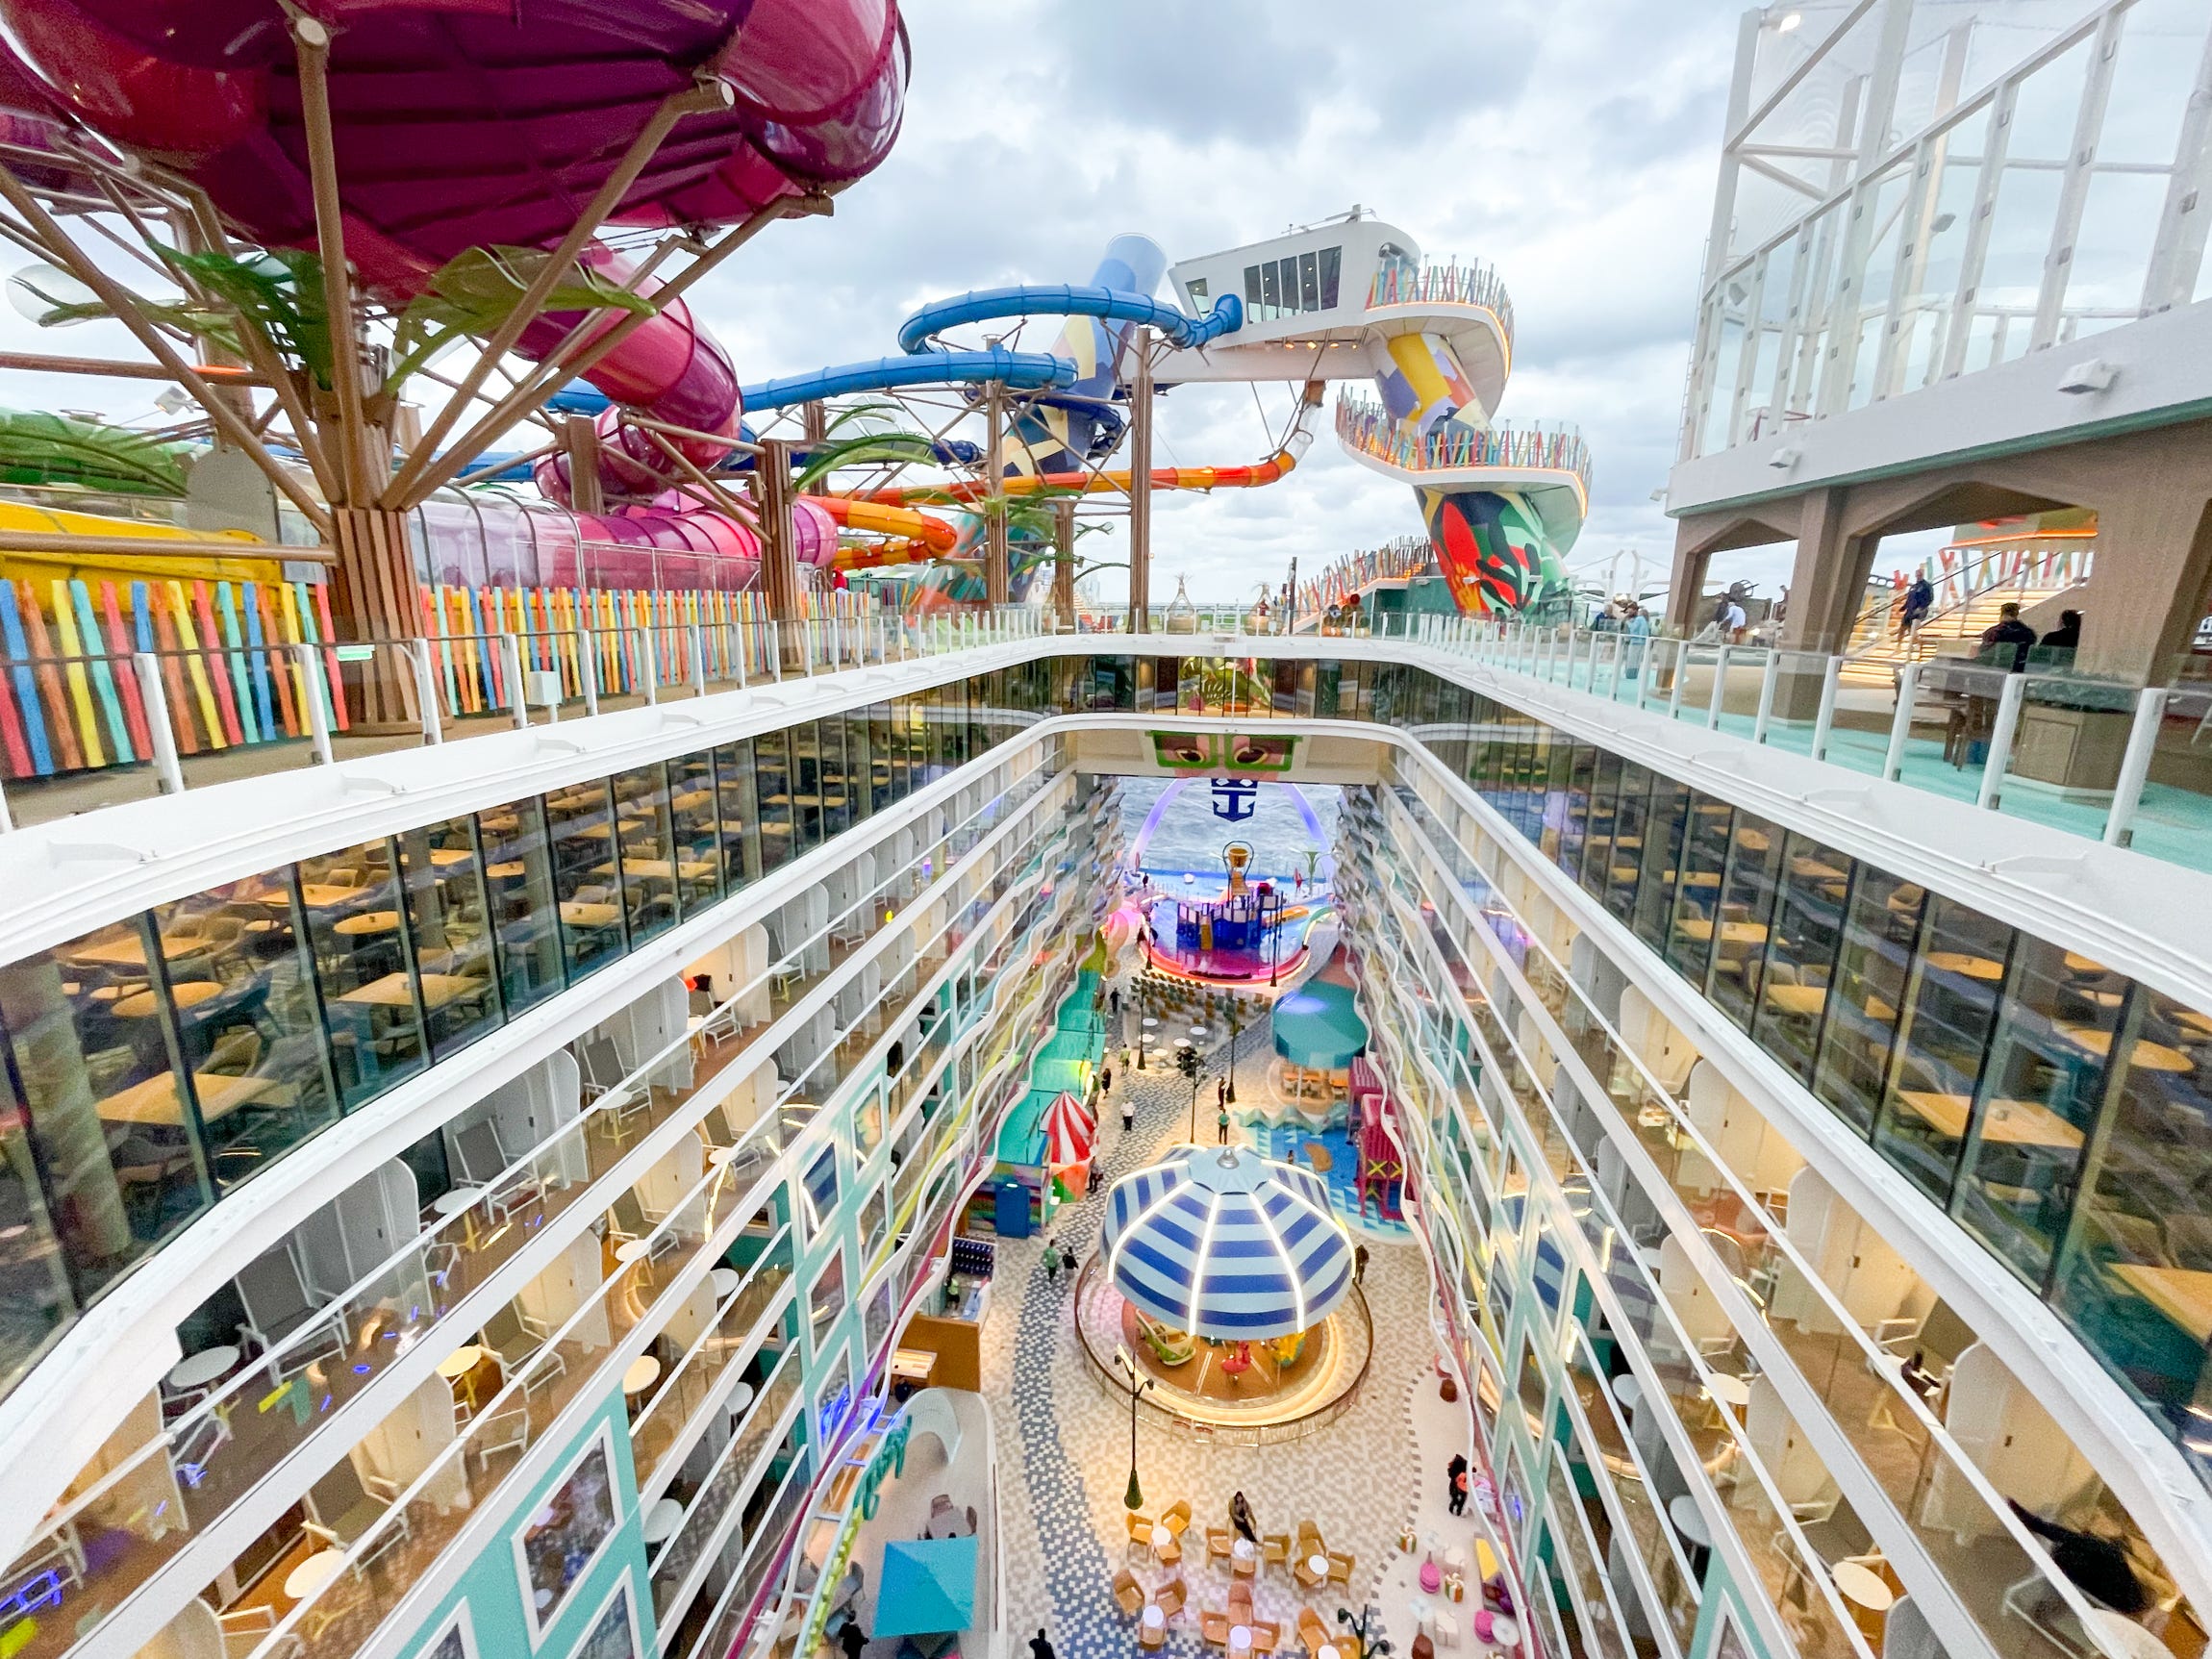 <ul class="summary-list"><li>I spent three nights on Royal Caribbean's new world's largest cruise ship, the 9,950-person <a href="https://www.businessinsider.com/royal-caribbean-icon-of-the-seas-cruise-ship-photo-tour-2024-1">Icon of the Seas</a>.</li><li>The 1,198-foot-long beast was overflowing with flashy amenities I never imagined possible on a ship.</li><li>Kids might love the $1,775-per-person ship, but I spent most of my time overwhelmed.</li></ul><p>Royal Caribbean's new <a href="https://www.businessinsider.com/royal-caribbean-icon-of-the-seas-cruise-ship-photo-tour-2024-1">Icon of the Seas</a> isn't a regular cruise ship. It's a cool cruise ship — one that will overwhelm you so much, you'll end up retreating to your tiny cabin more than you expected.</p><p>Love it or hate it, the 250,800-gross-ton vessel is here and hard to ignore. At 1,198 feet-long and 20 decks tall, the Icon of the Seas and its rainbow spaghetti-like water park stands out from its comrades at <a href="https://www.businessinsider.com/things-about-royal-caribbean-icon-of-the-seas-2024-1">Miami's bustling cruise terminal</a>.</p><p>Get used to the sight: The new world's largest cruise ship will be homeported there for a year of <a href="https://www.businessinsider.com/royal-caribbean-icon-of-the-seas-trip-price-expensive-2023-11">seven-night cruises</a>.</p><p>Looking at a ship of its size, it's hard not to wonder: Has science gone too far? Is it as overwhelming as it seems? Is it safe? Will it blow a hole in the ozone layer?! (The answers, in order, are: maybe, yes, yes, <a href="https://www.reuters.com/business/environment/worlds-largest-cruise-ship-sets-sail-bringing-concerns-about-methane-emissions-2024-01-27/">maybe</a>.)</p><div class="read-original">Read the original article on <a href="https://www.businessinsider.com/royal-caribbean-icon-of-the-seas-cruise-ship-review-photos-2024-2">Business Insider</a></div>